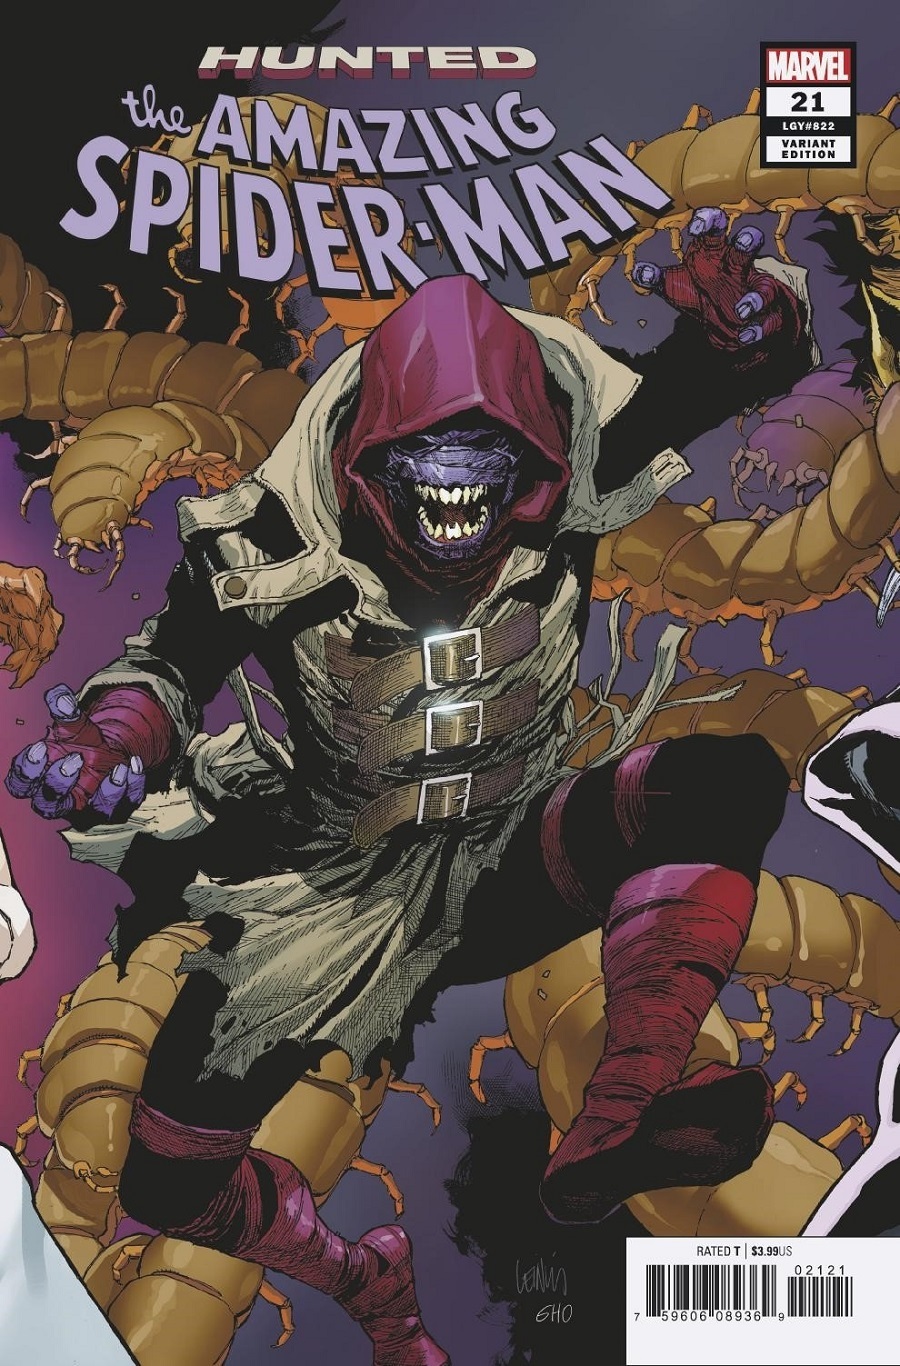 Previews: May 15th, 2019 - Spider Man Crawlspace